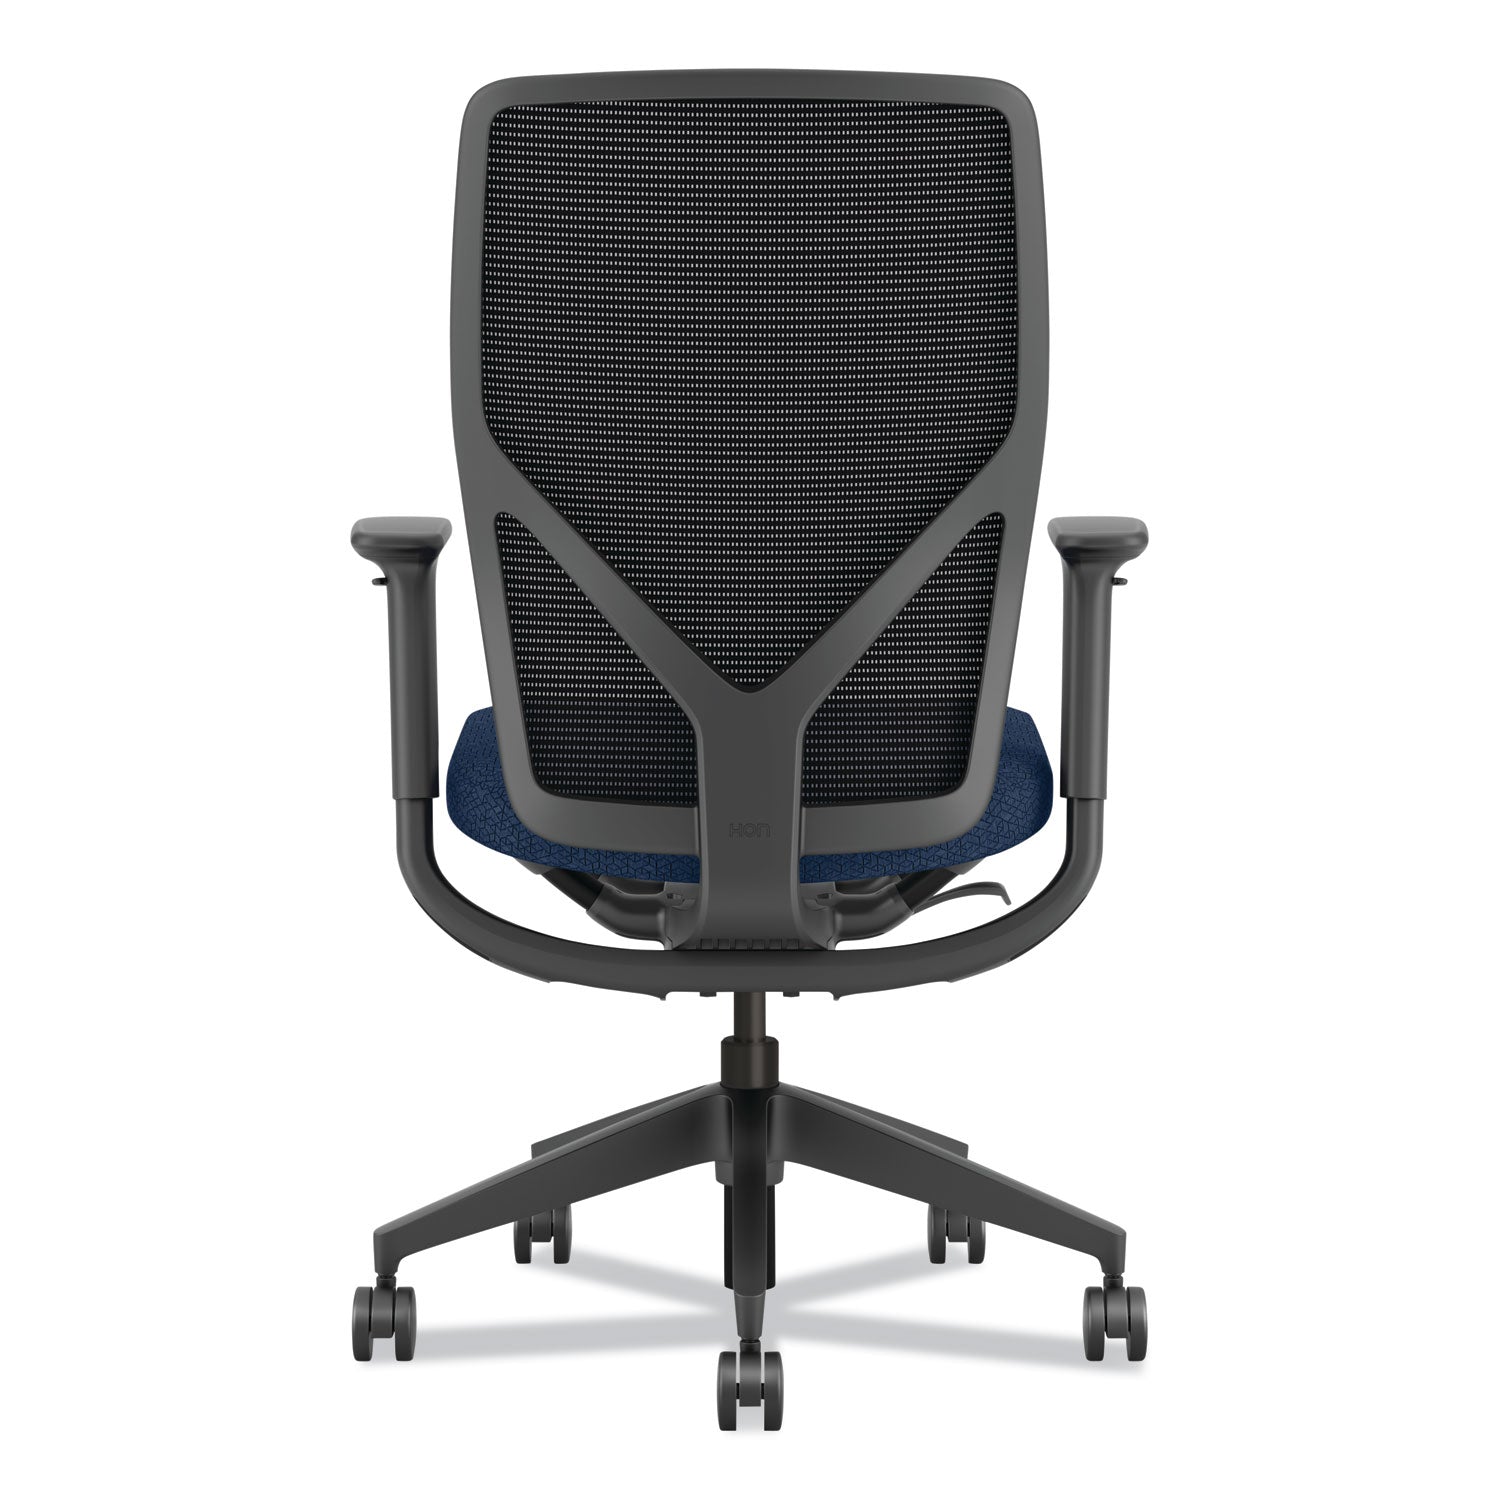 flexion-mesh-back-chair-supports-up-to-300-lb-1481-to-197-seat-ht-navy-seat-black-back-base-ships-in-7-10-bus-days_honfxtsamax13nl - 2